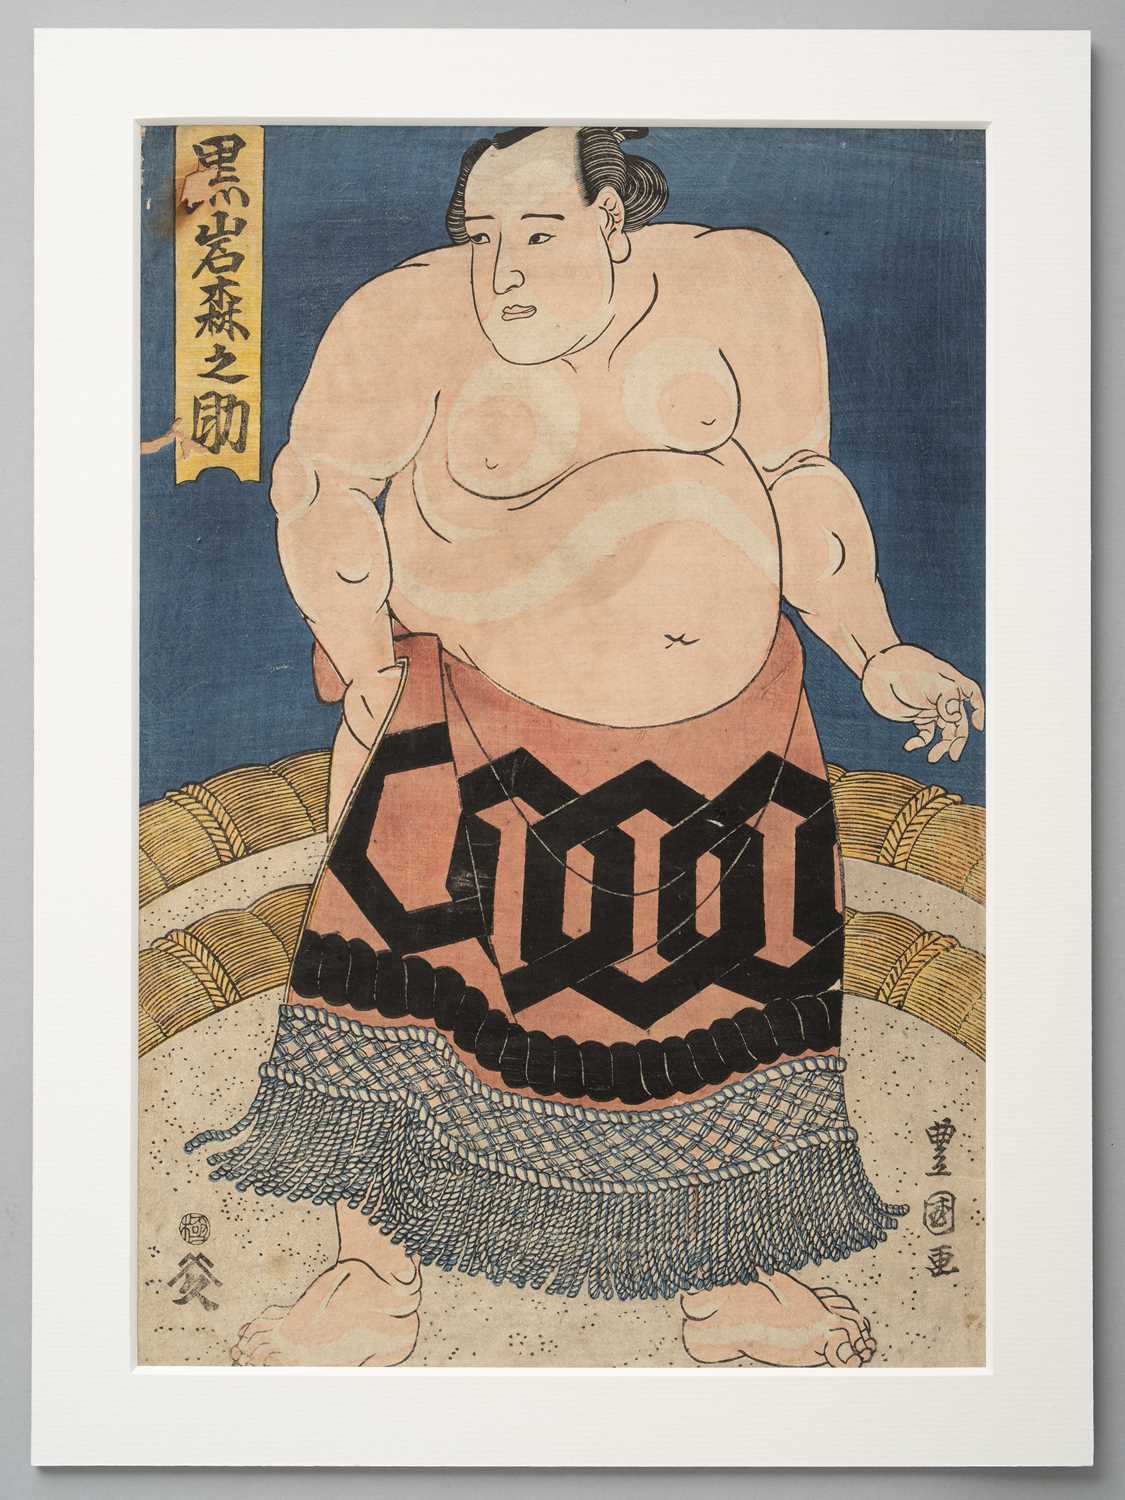 NO RESERVE UNIDENTIFIED ARTISTS SUMO-E (PORTRAITS OF SUMO WRESTLERS) EDO OR MEIJI, 19TH CENTURY A - Image 6 of 9